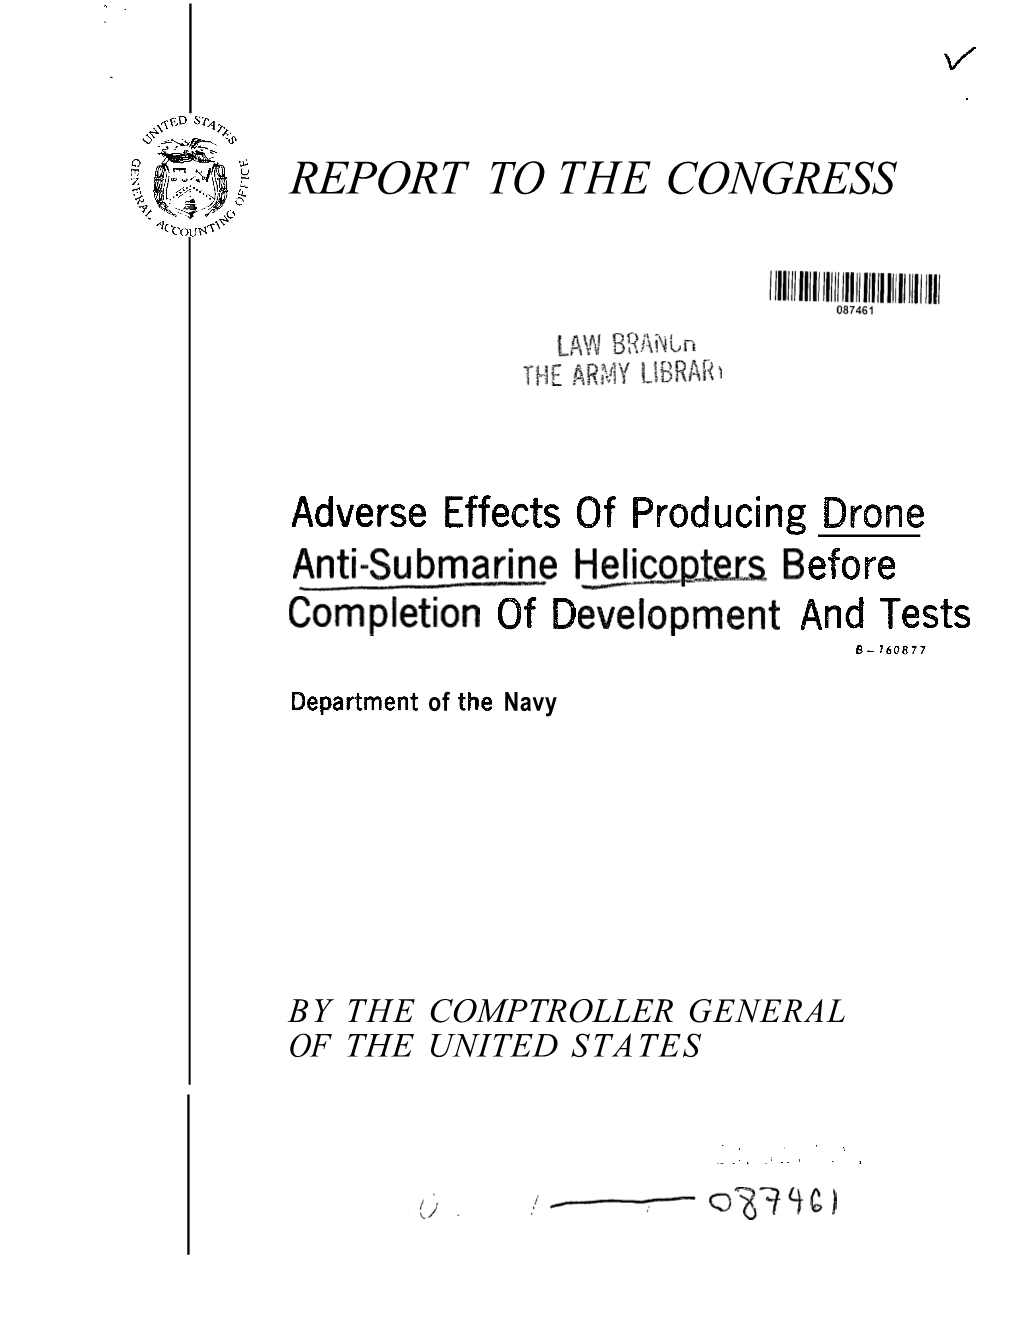 B-160877 Adverse Effects of Producing Drone Anti-Submarine